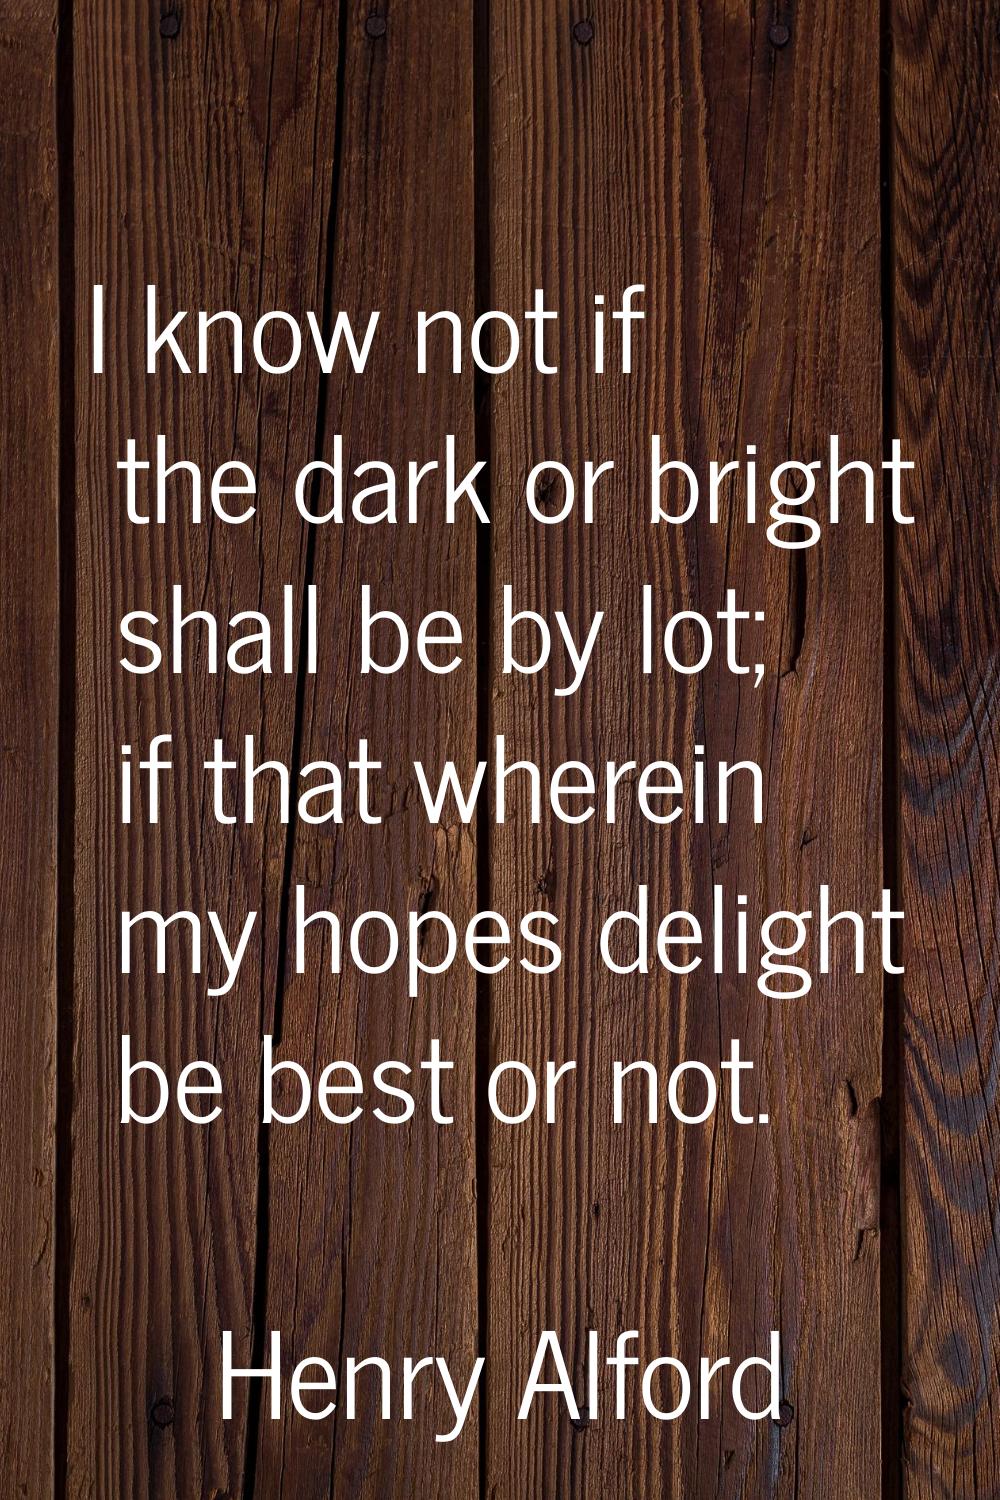 I know not if the dark or bright shall be by lot; if that wherein my hopes delight be best or not.